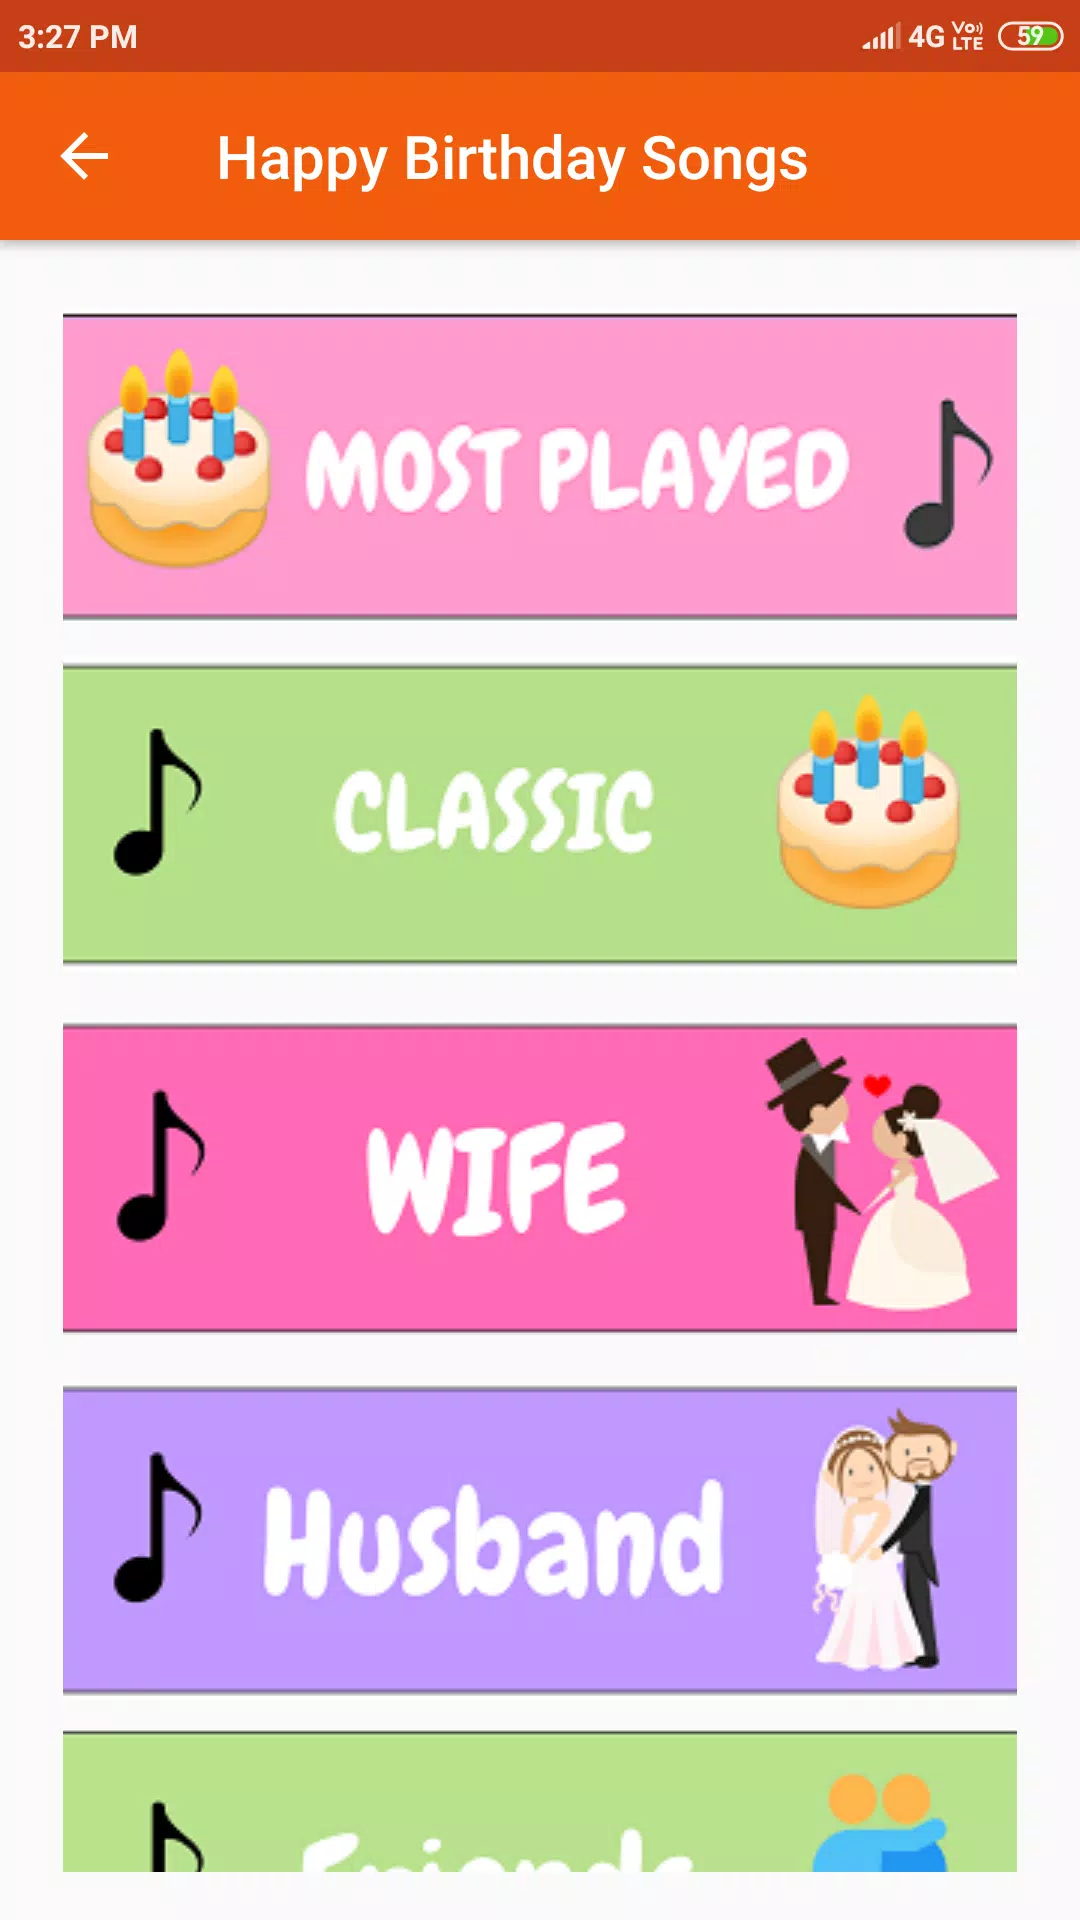 Happy birthday songs mp3 APK pour Android Télécharger